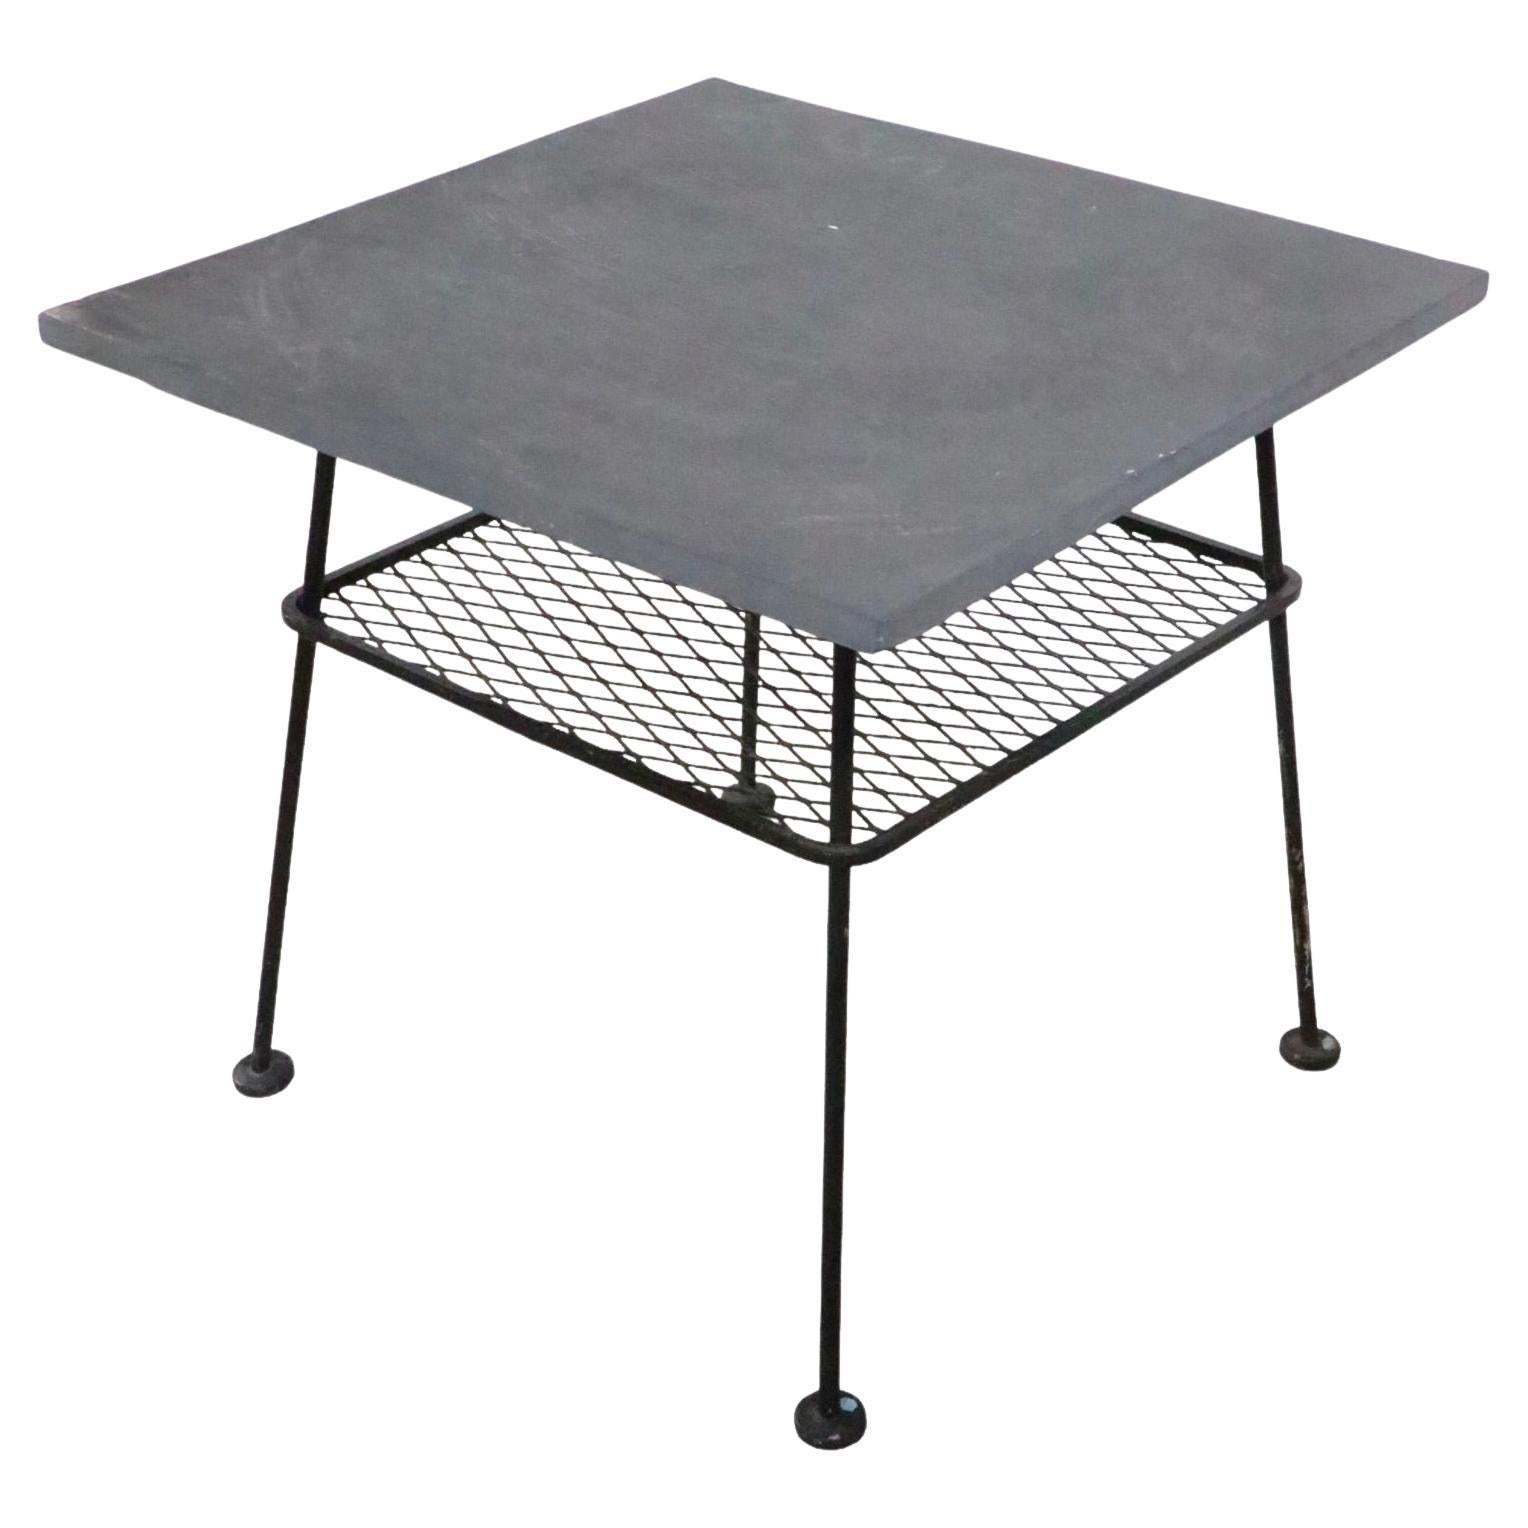 Wrought Iron and Slate Garden Patio, Sunroom Table After McCobb, Woodard, 1950s For Sale